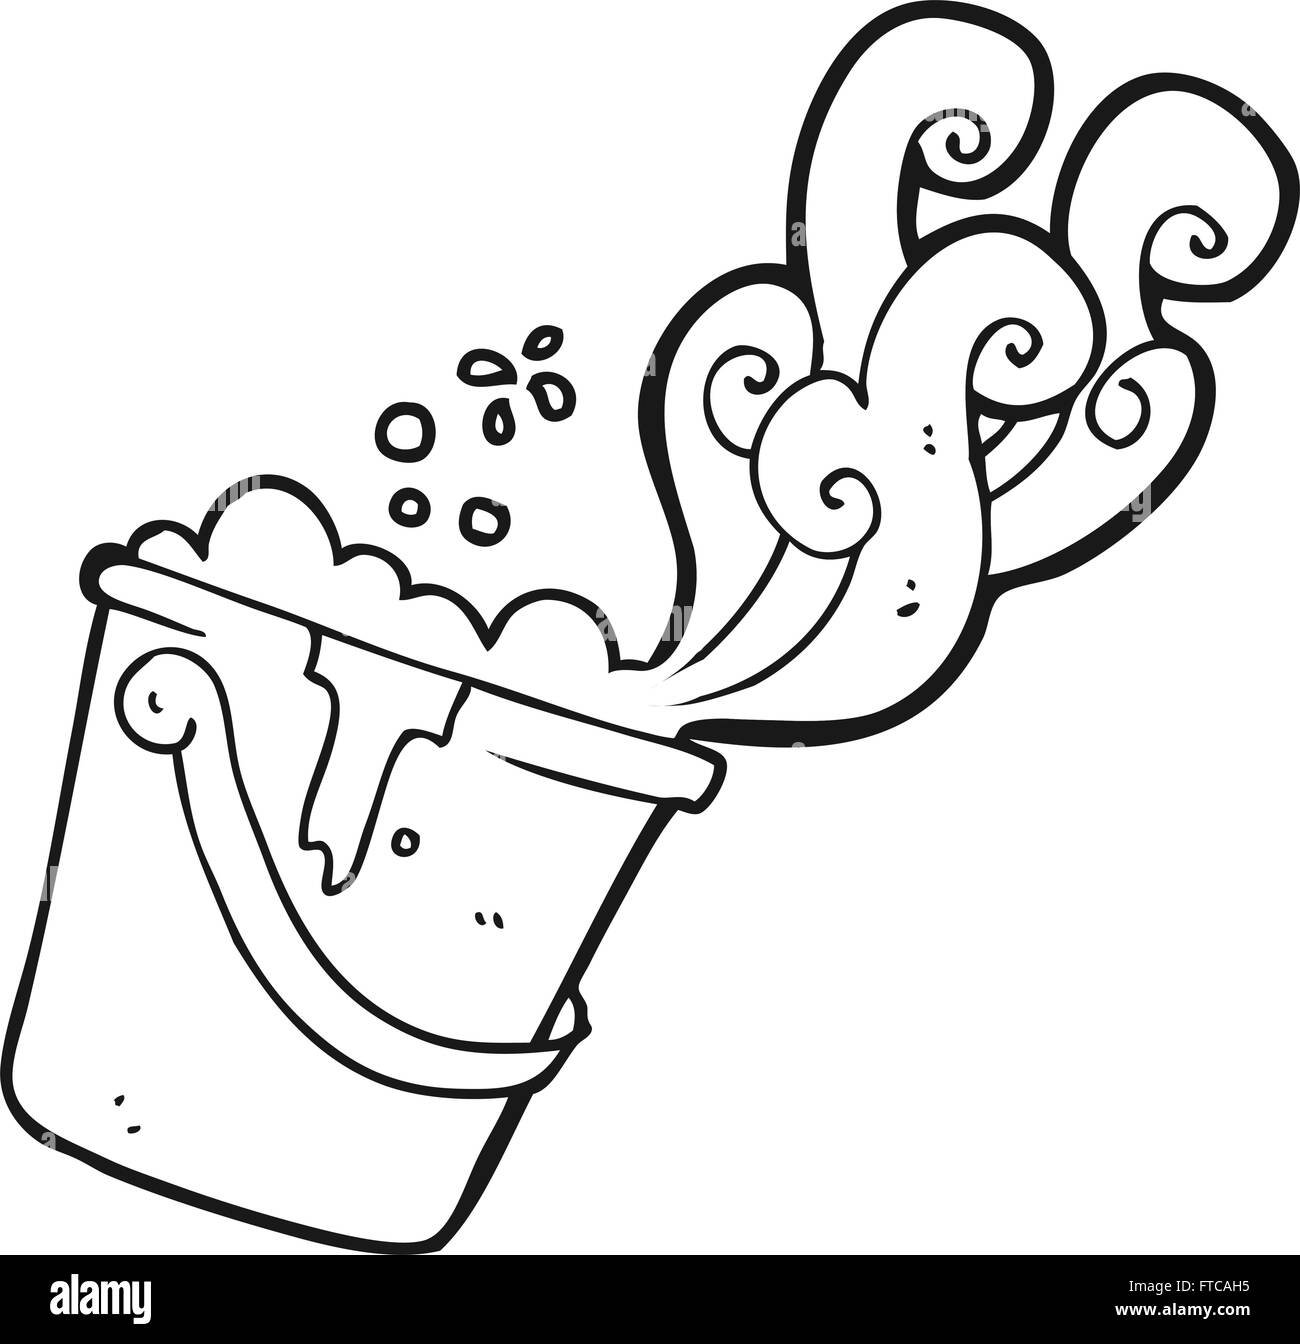 freehand drawn black and white cartoon cleaning bucket Stock Vector